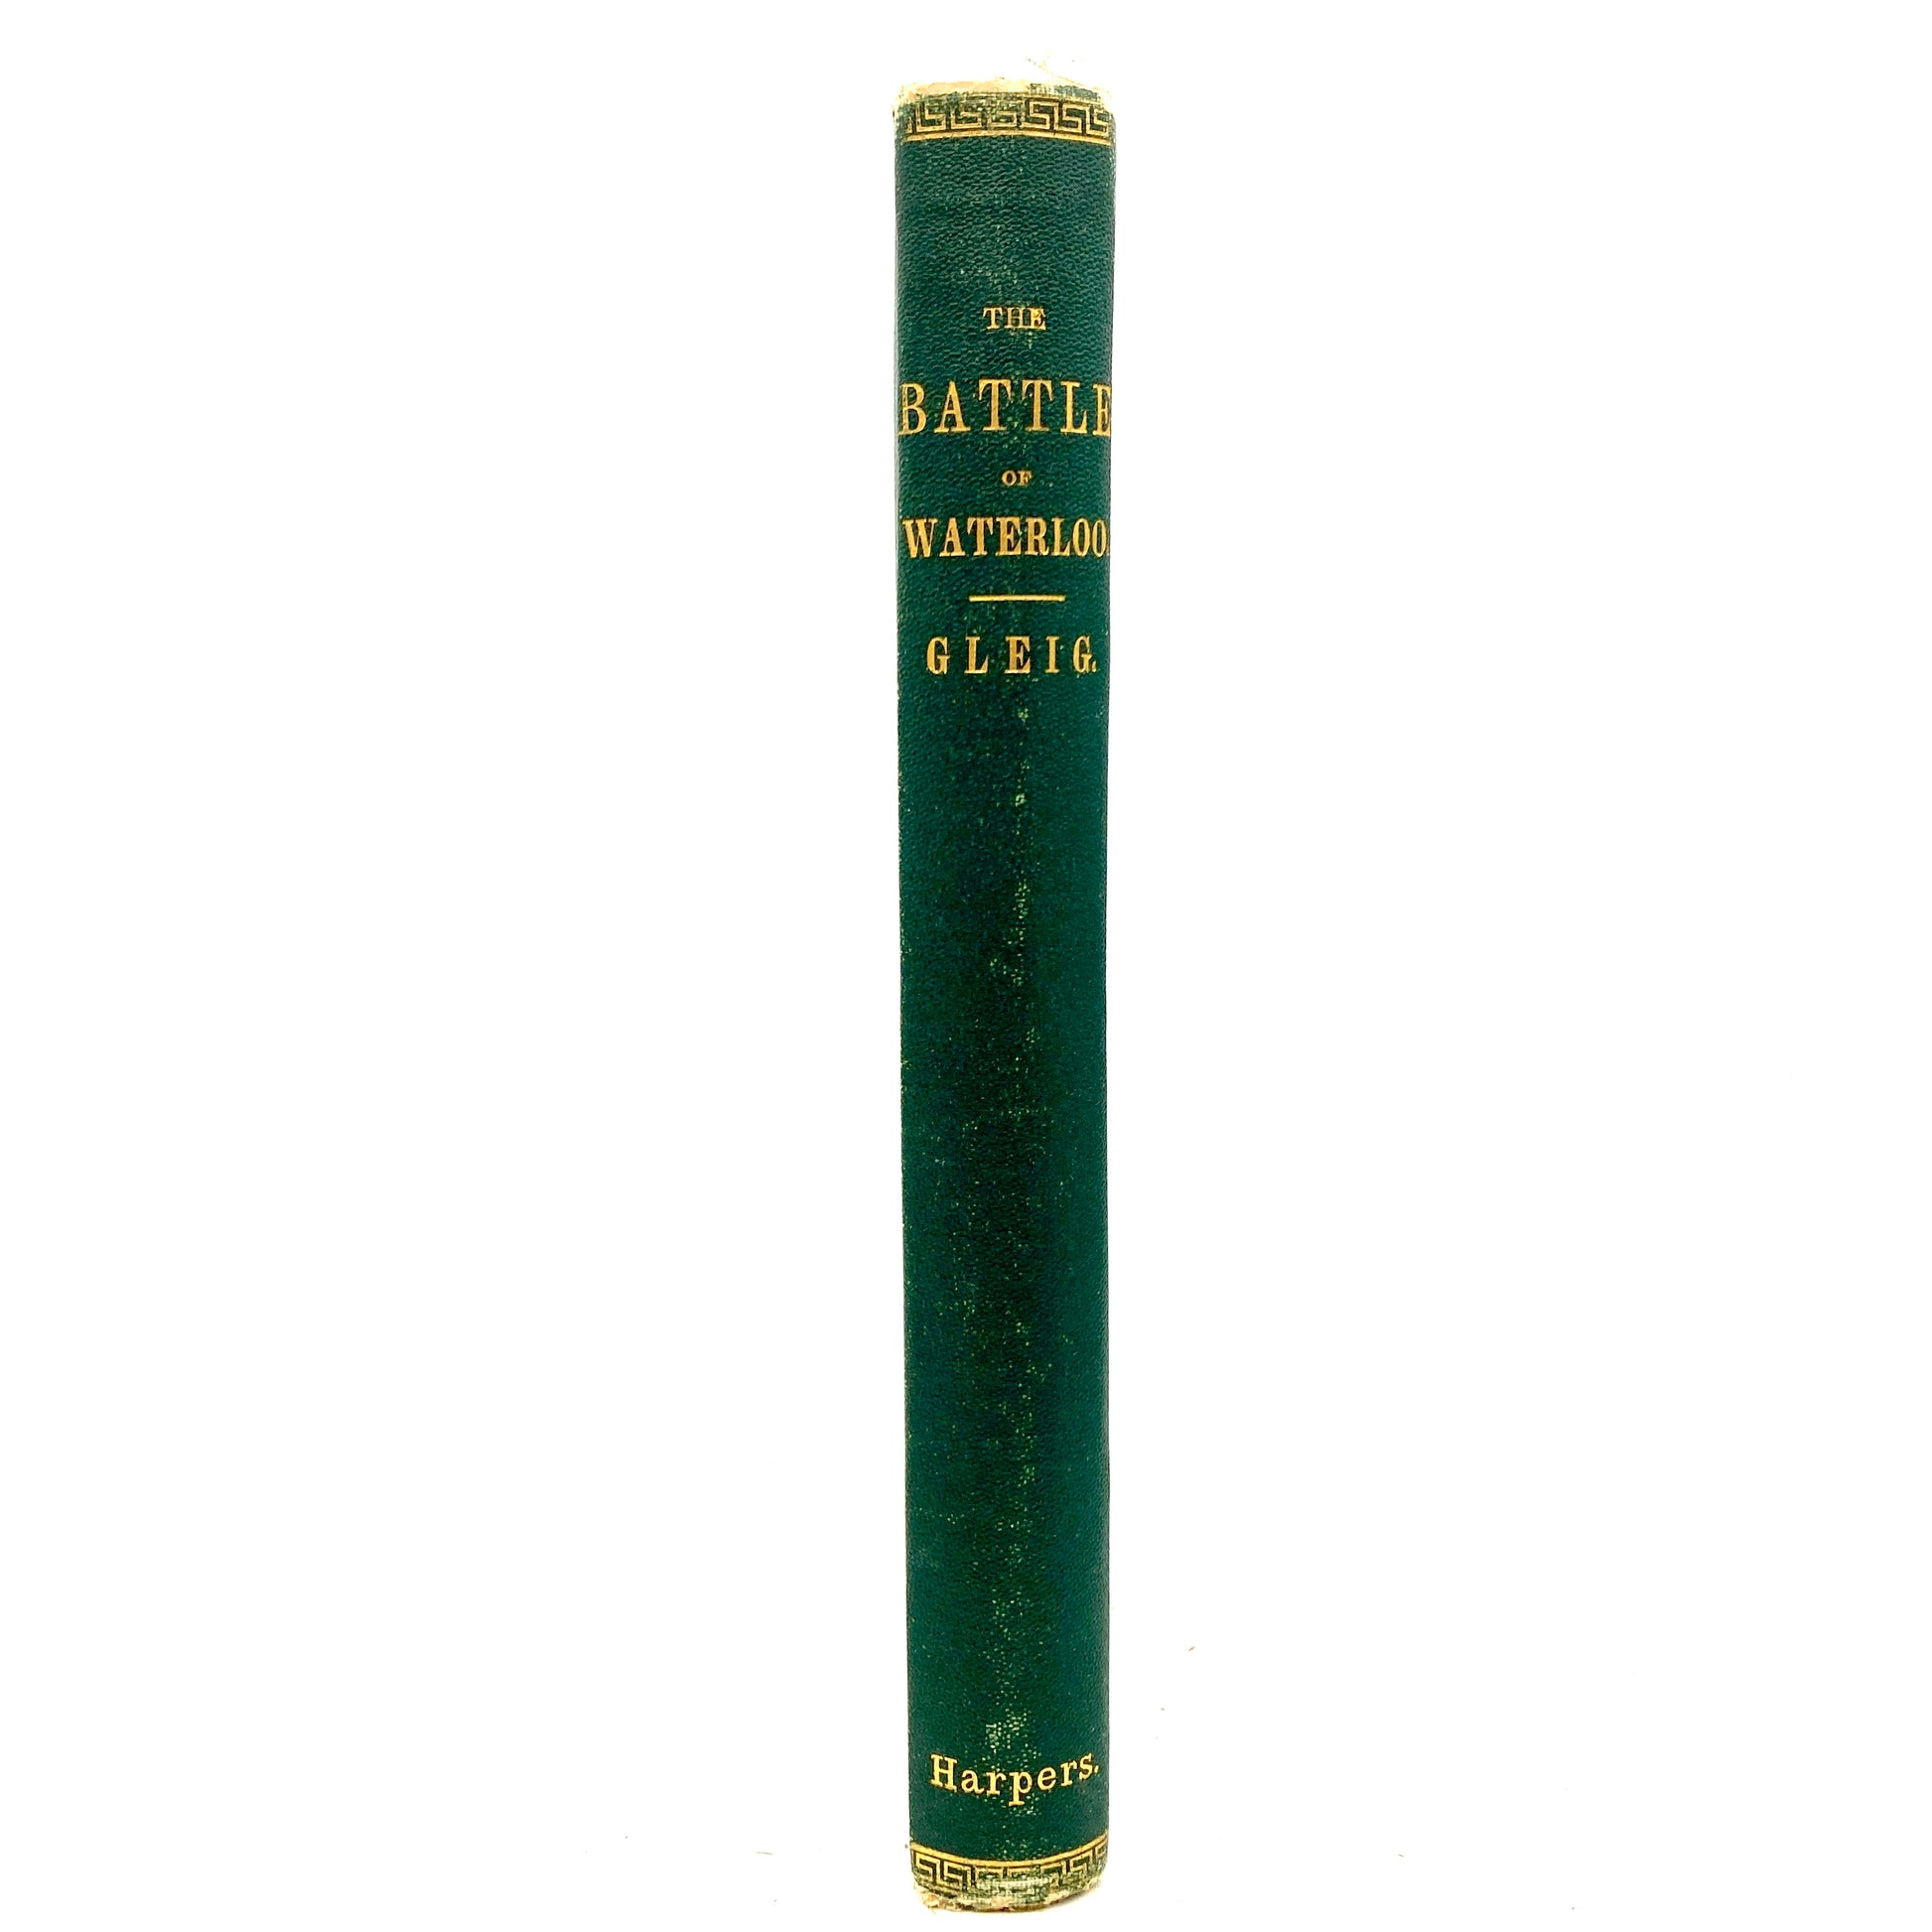 GLEIG, Rev. G.L. "The Story of The Battle of Waterloo" [Harper & Brothers, 1875] - Buzz Bookstore